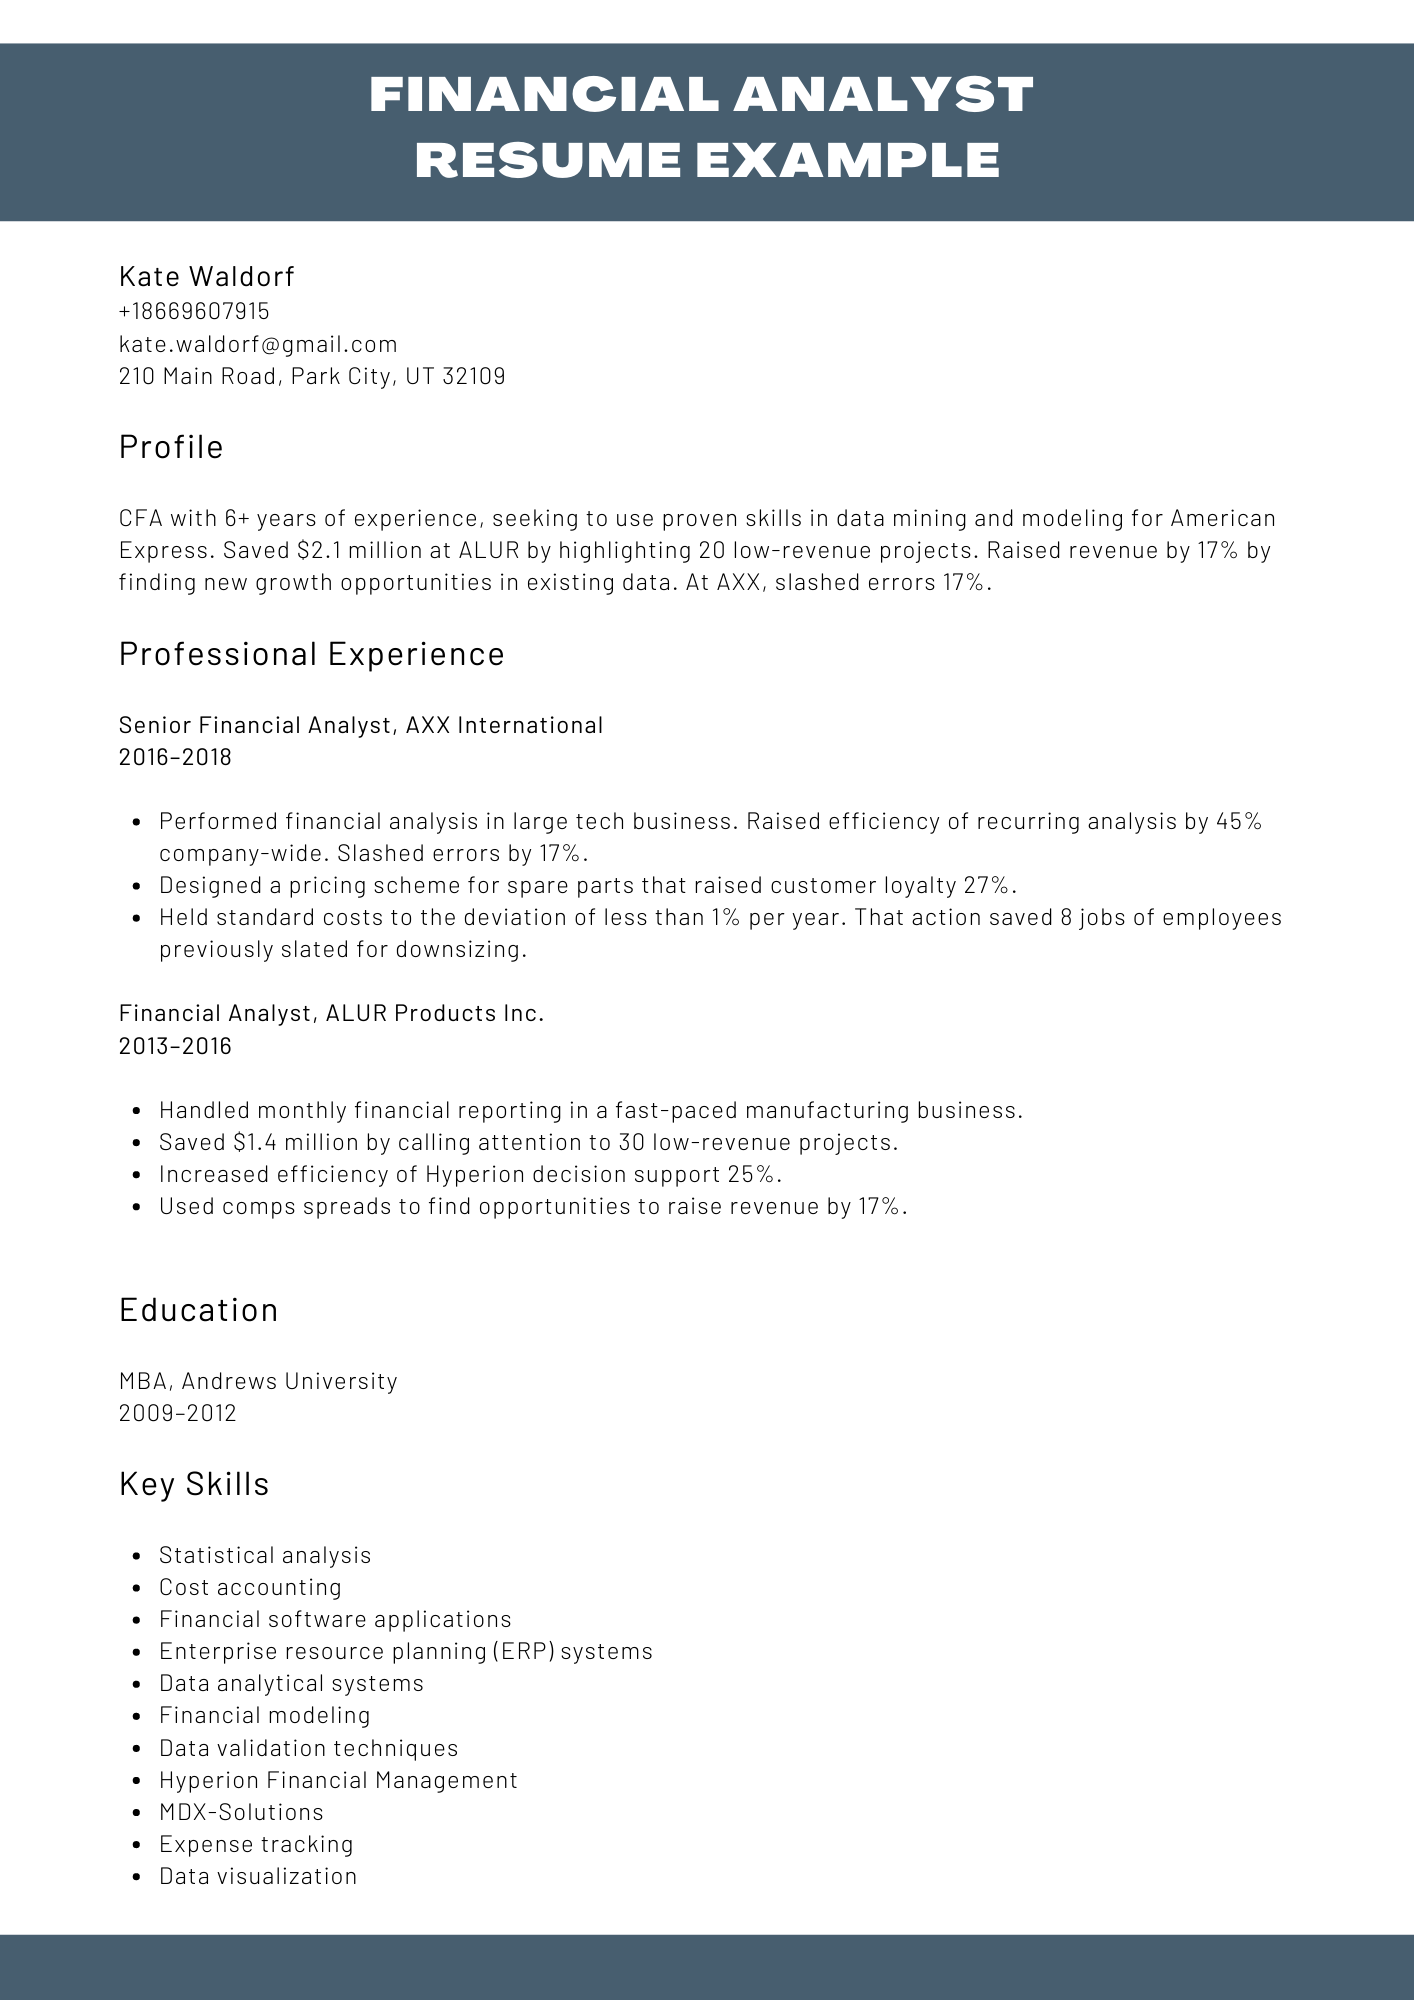 Financial Analyst Resume Sample